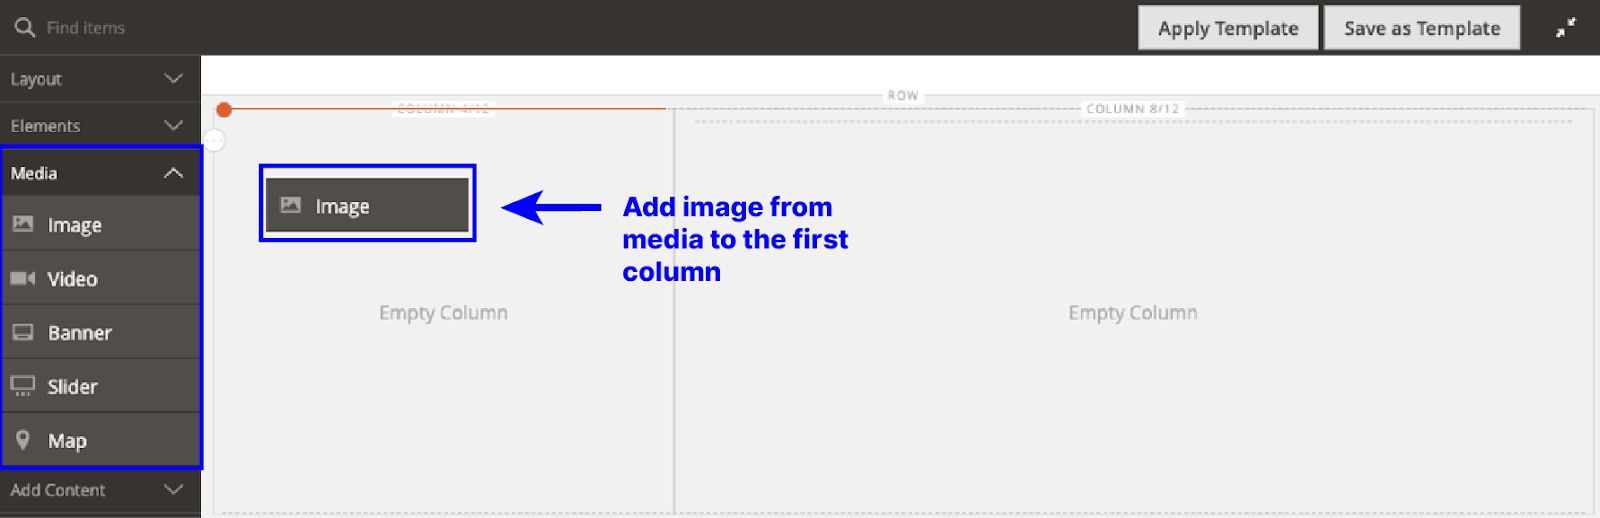 Drag and drop the image component to a column in the Magento 2 Page Builder staging area